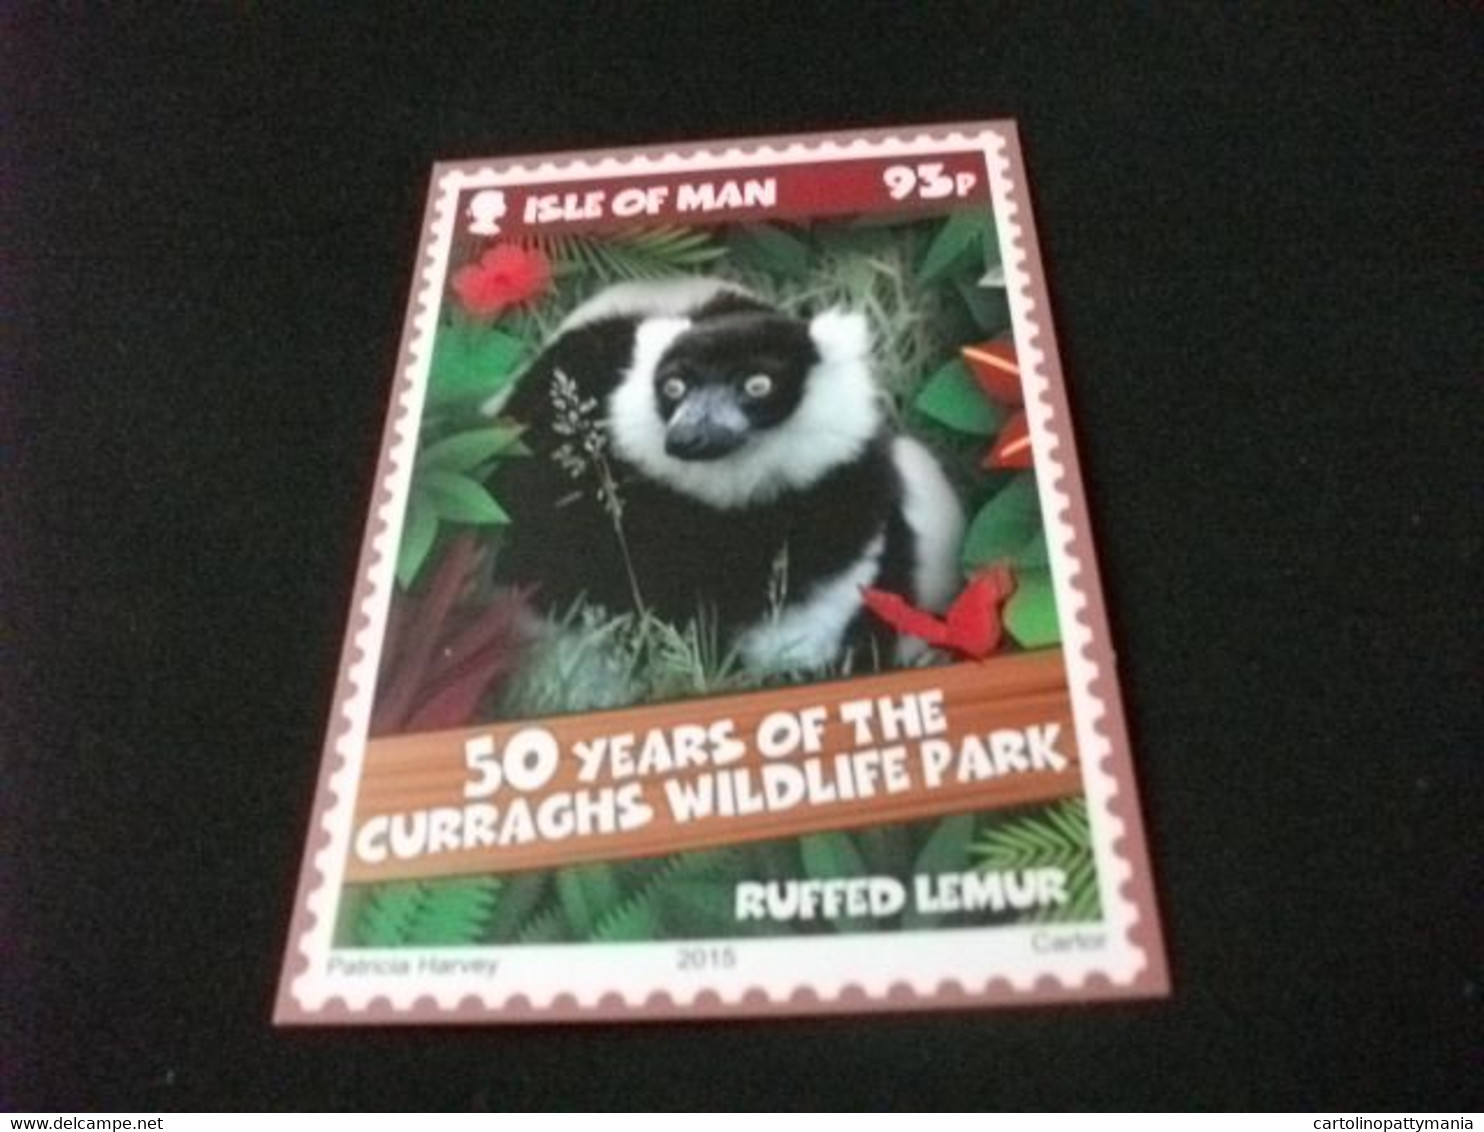 ANIMALI ISLE OF MAN 50 YEARS OF THE CURRAGHS WILD LIFE PARK 2015 RUFFED LEMUR  LEMORE RUFFATO - Stamps (pictures)